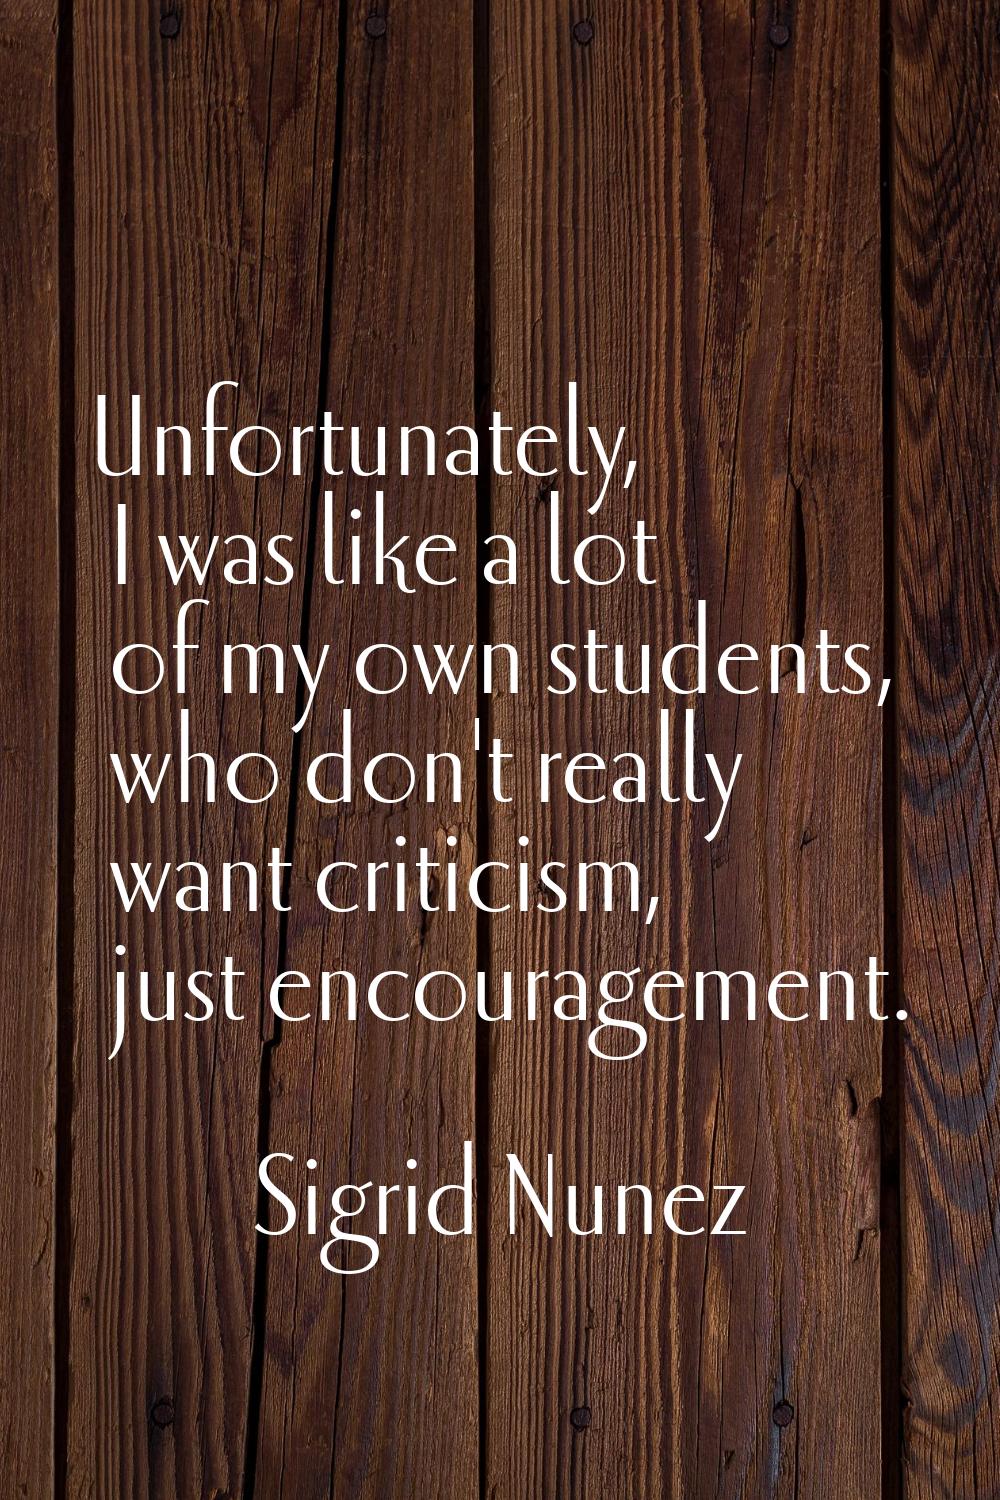 Unfortunately, I was like a lot of my own students, who don't really want criticism, just encourage